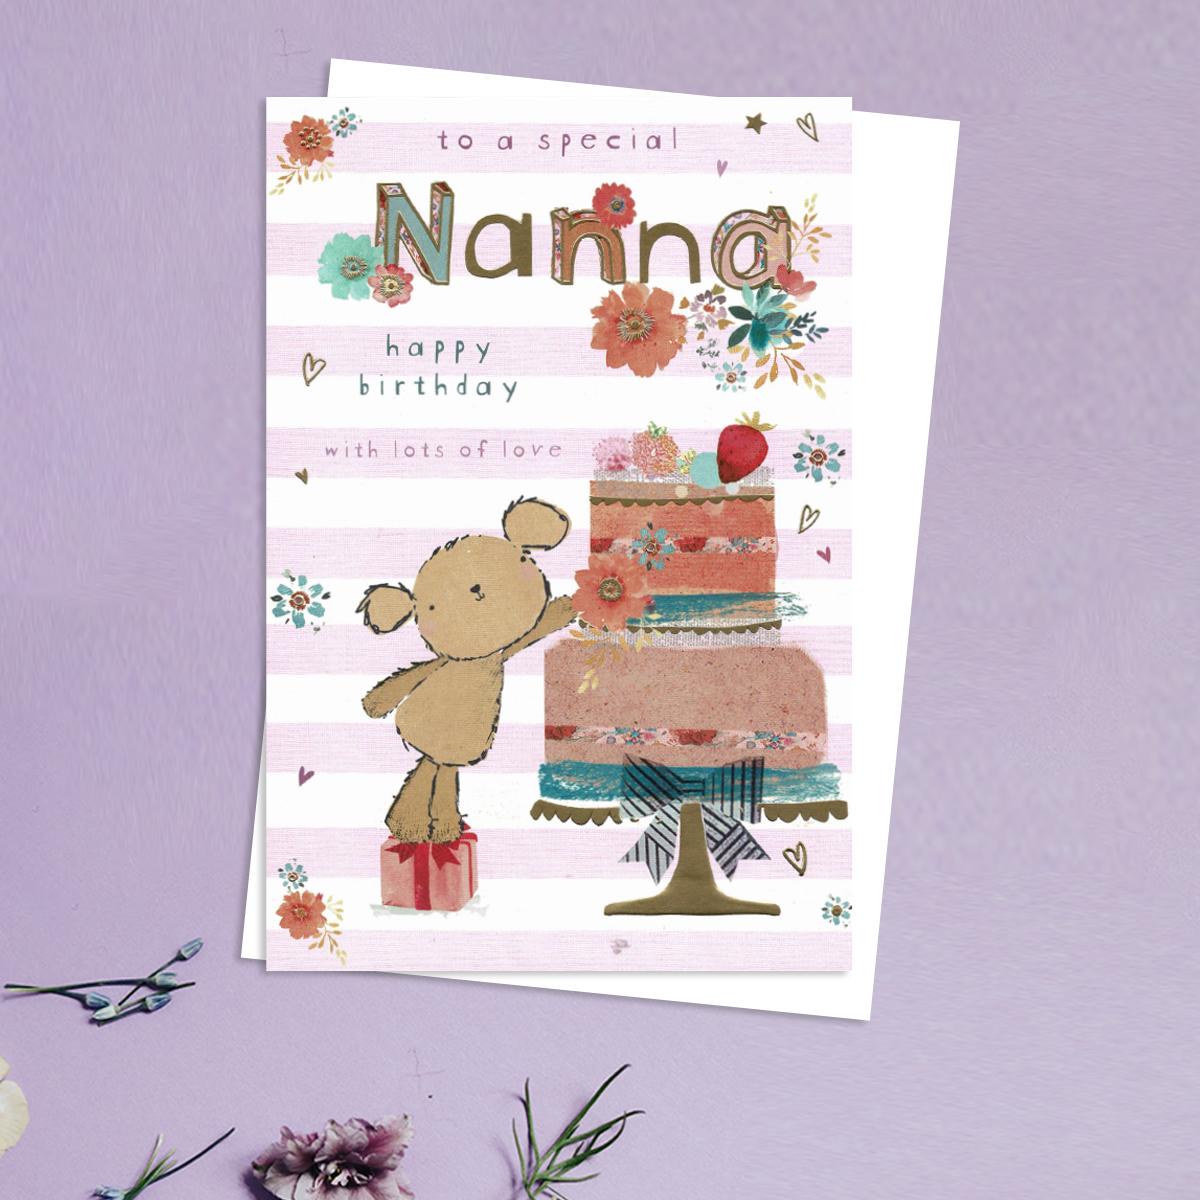 To A Special Nanna Happy Birthday Design Showing A Teddy Reaching Up To A Large Cake On A Stand. With Gold Foil Detail And White Envelope